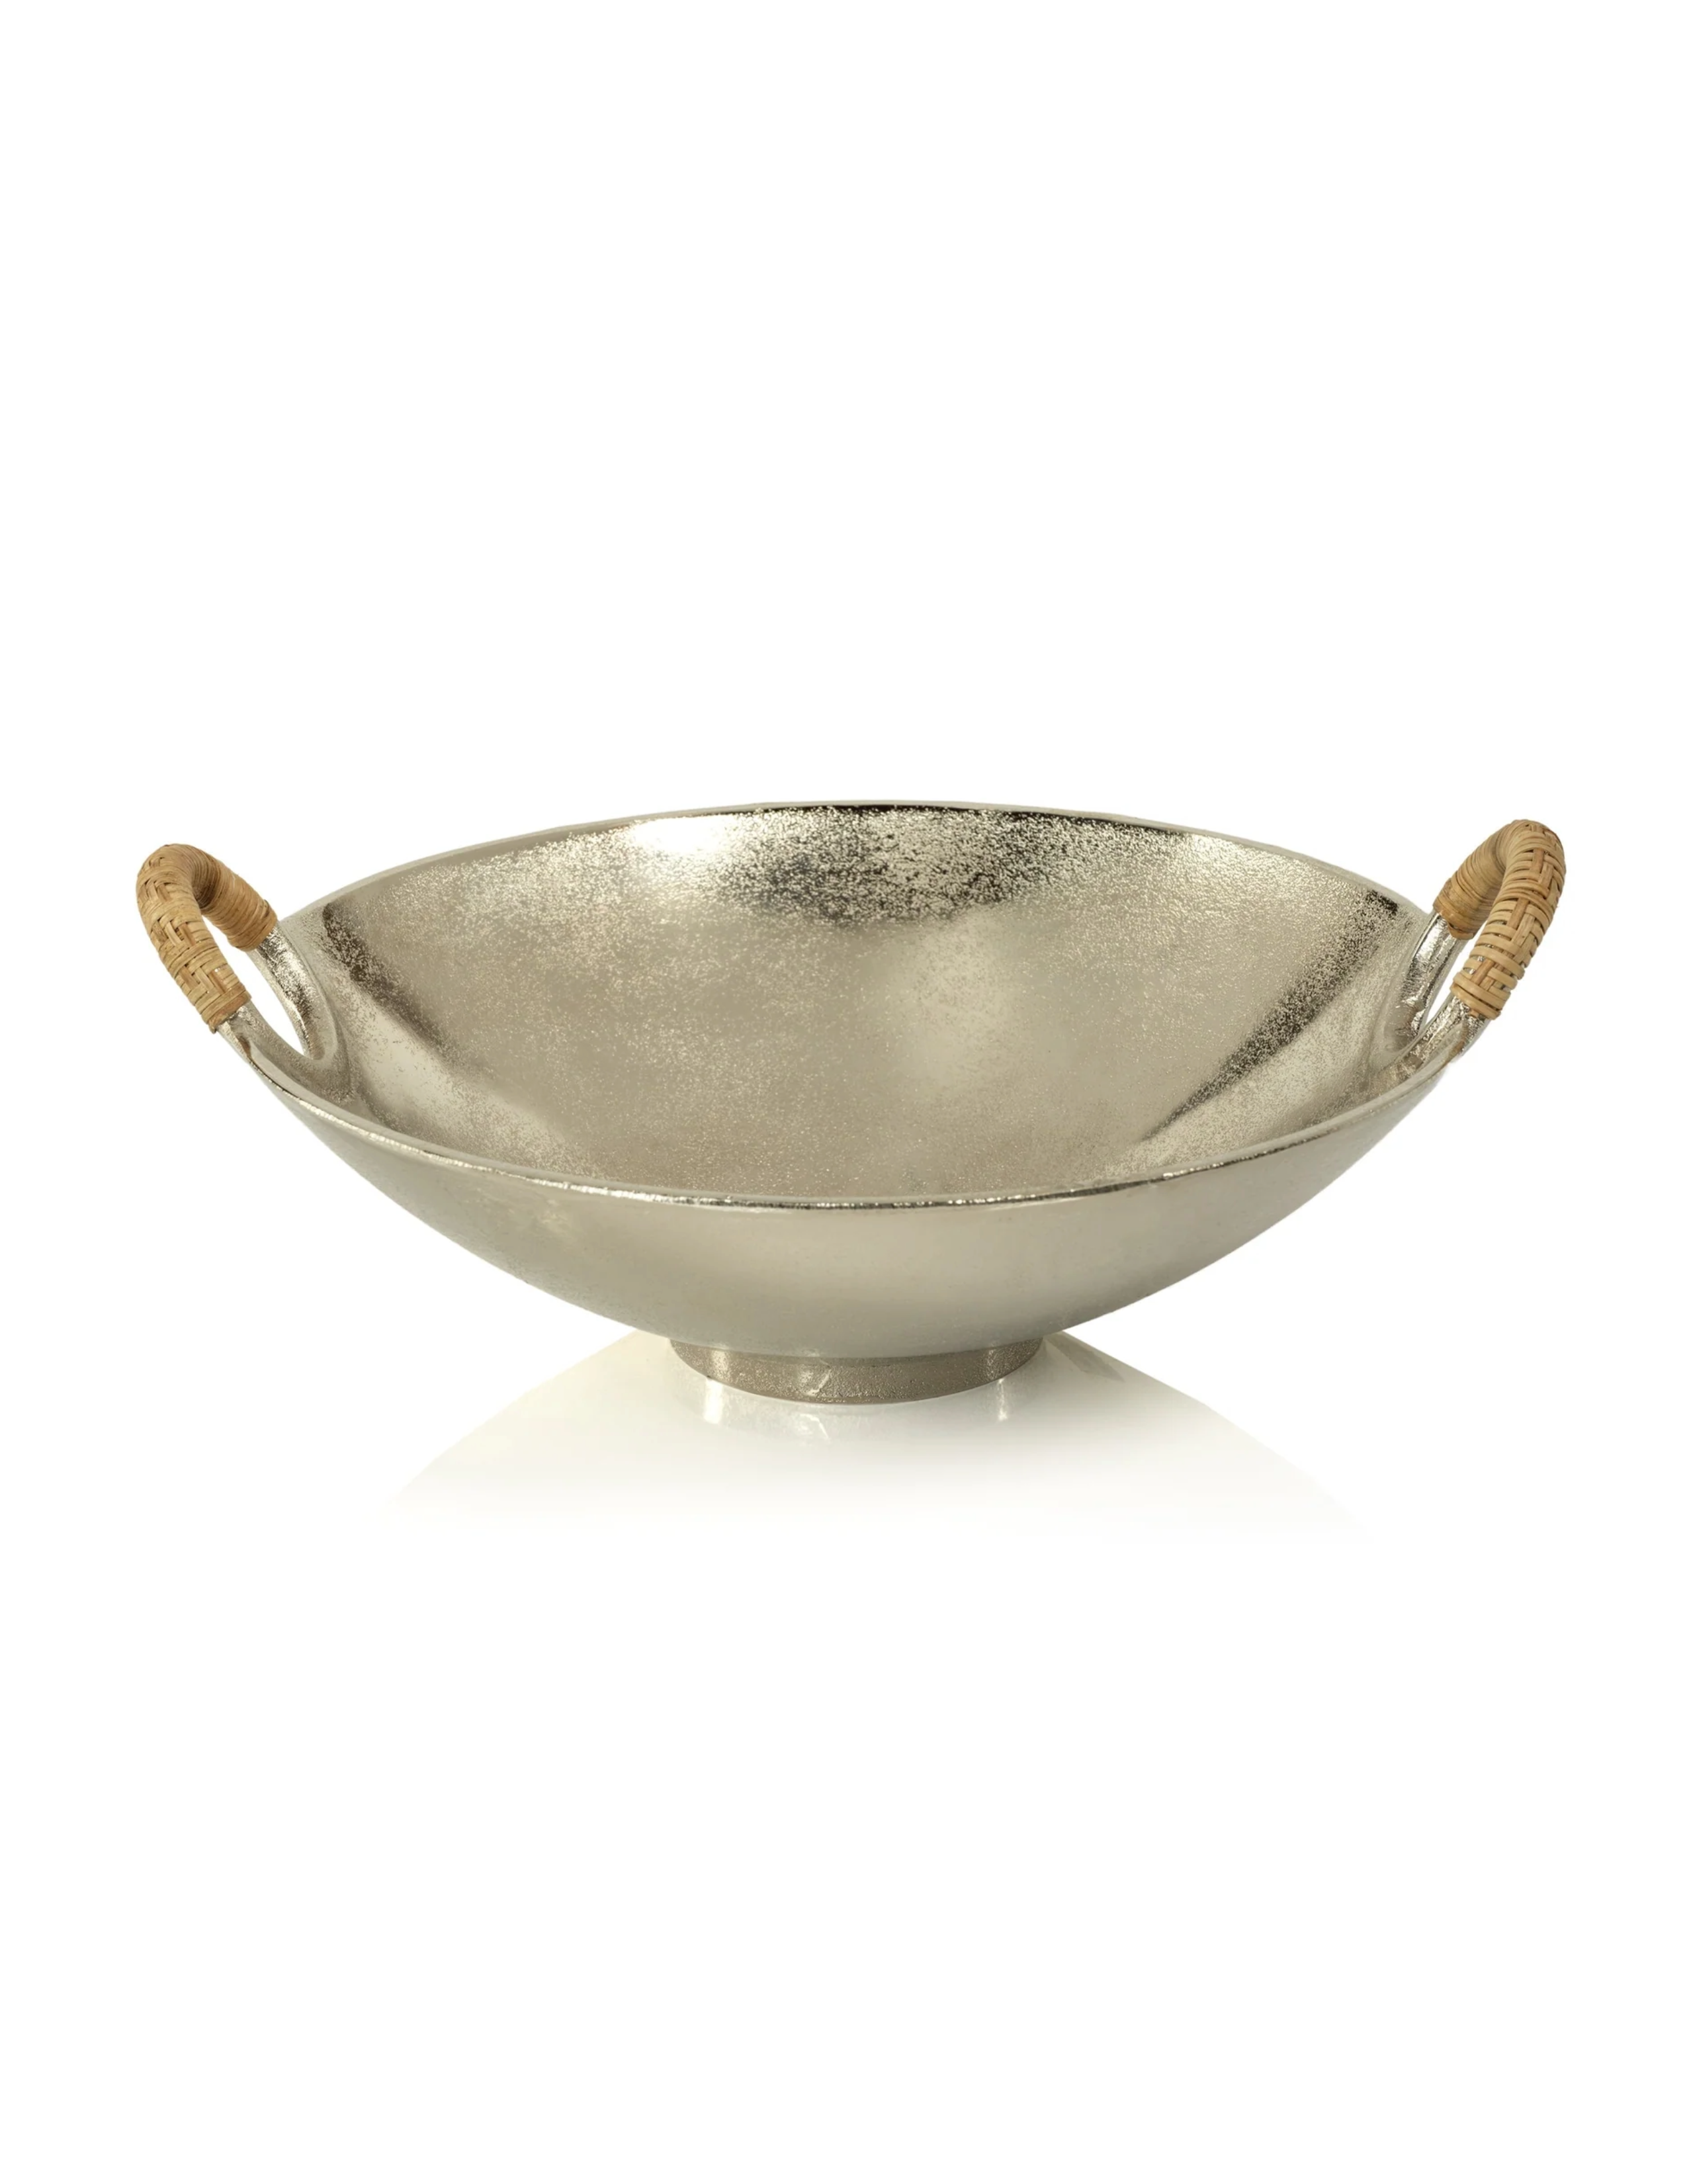 Mendocino Aluminum Bowl with Rattan Wrapped Handles